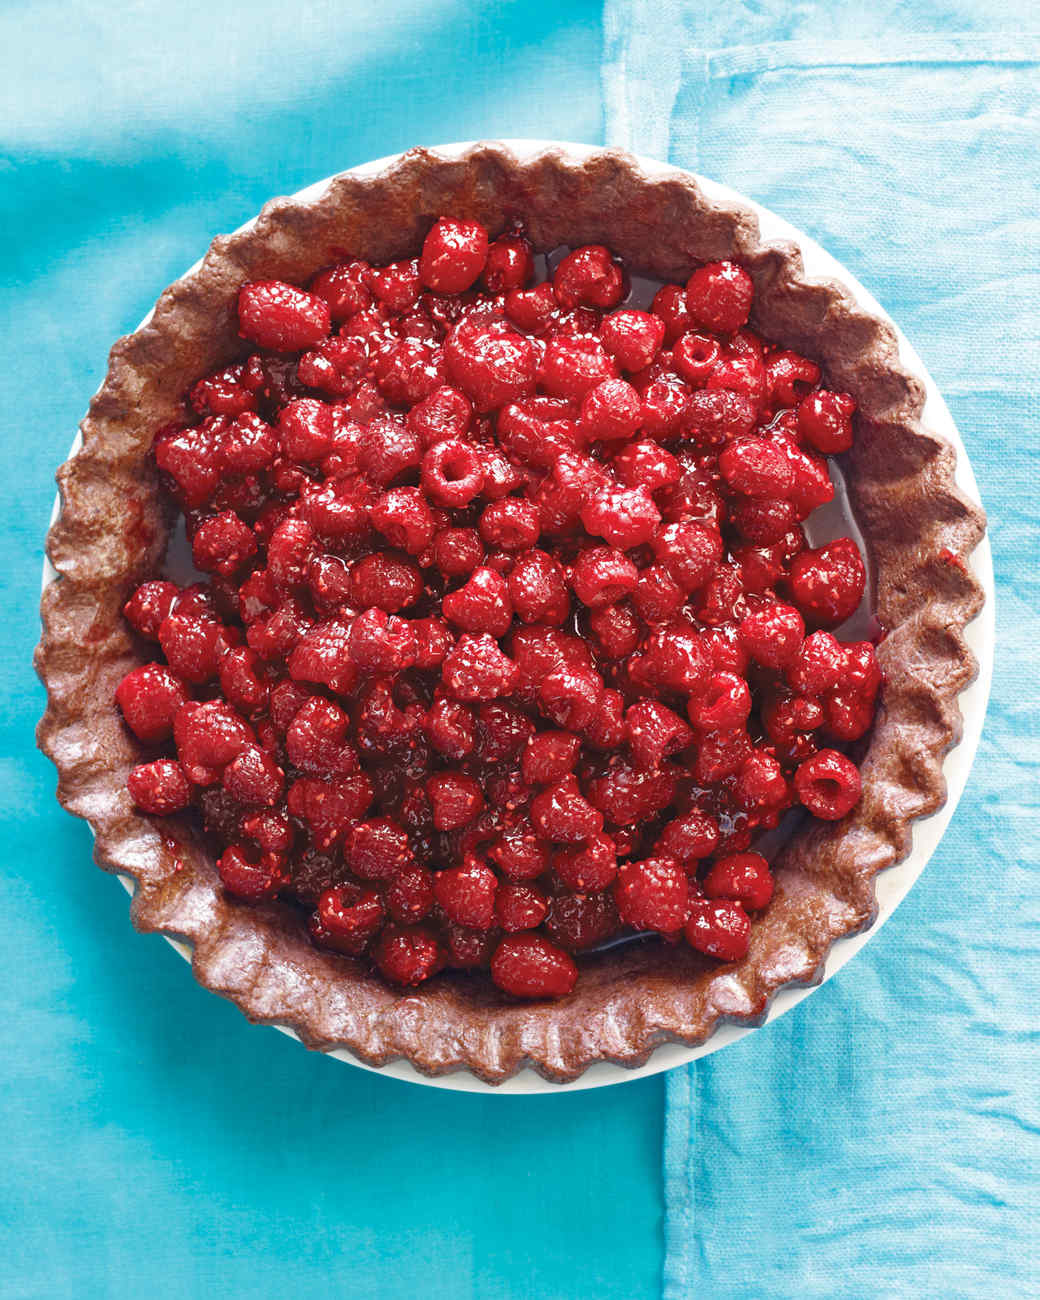 What are the best fresh raspberry recipes for the summer?